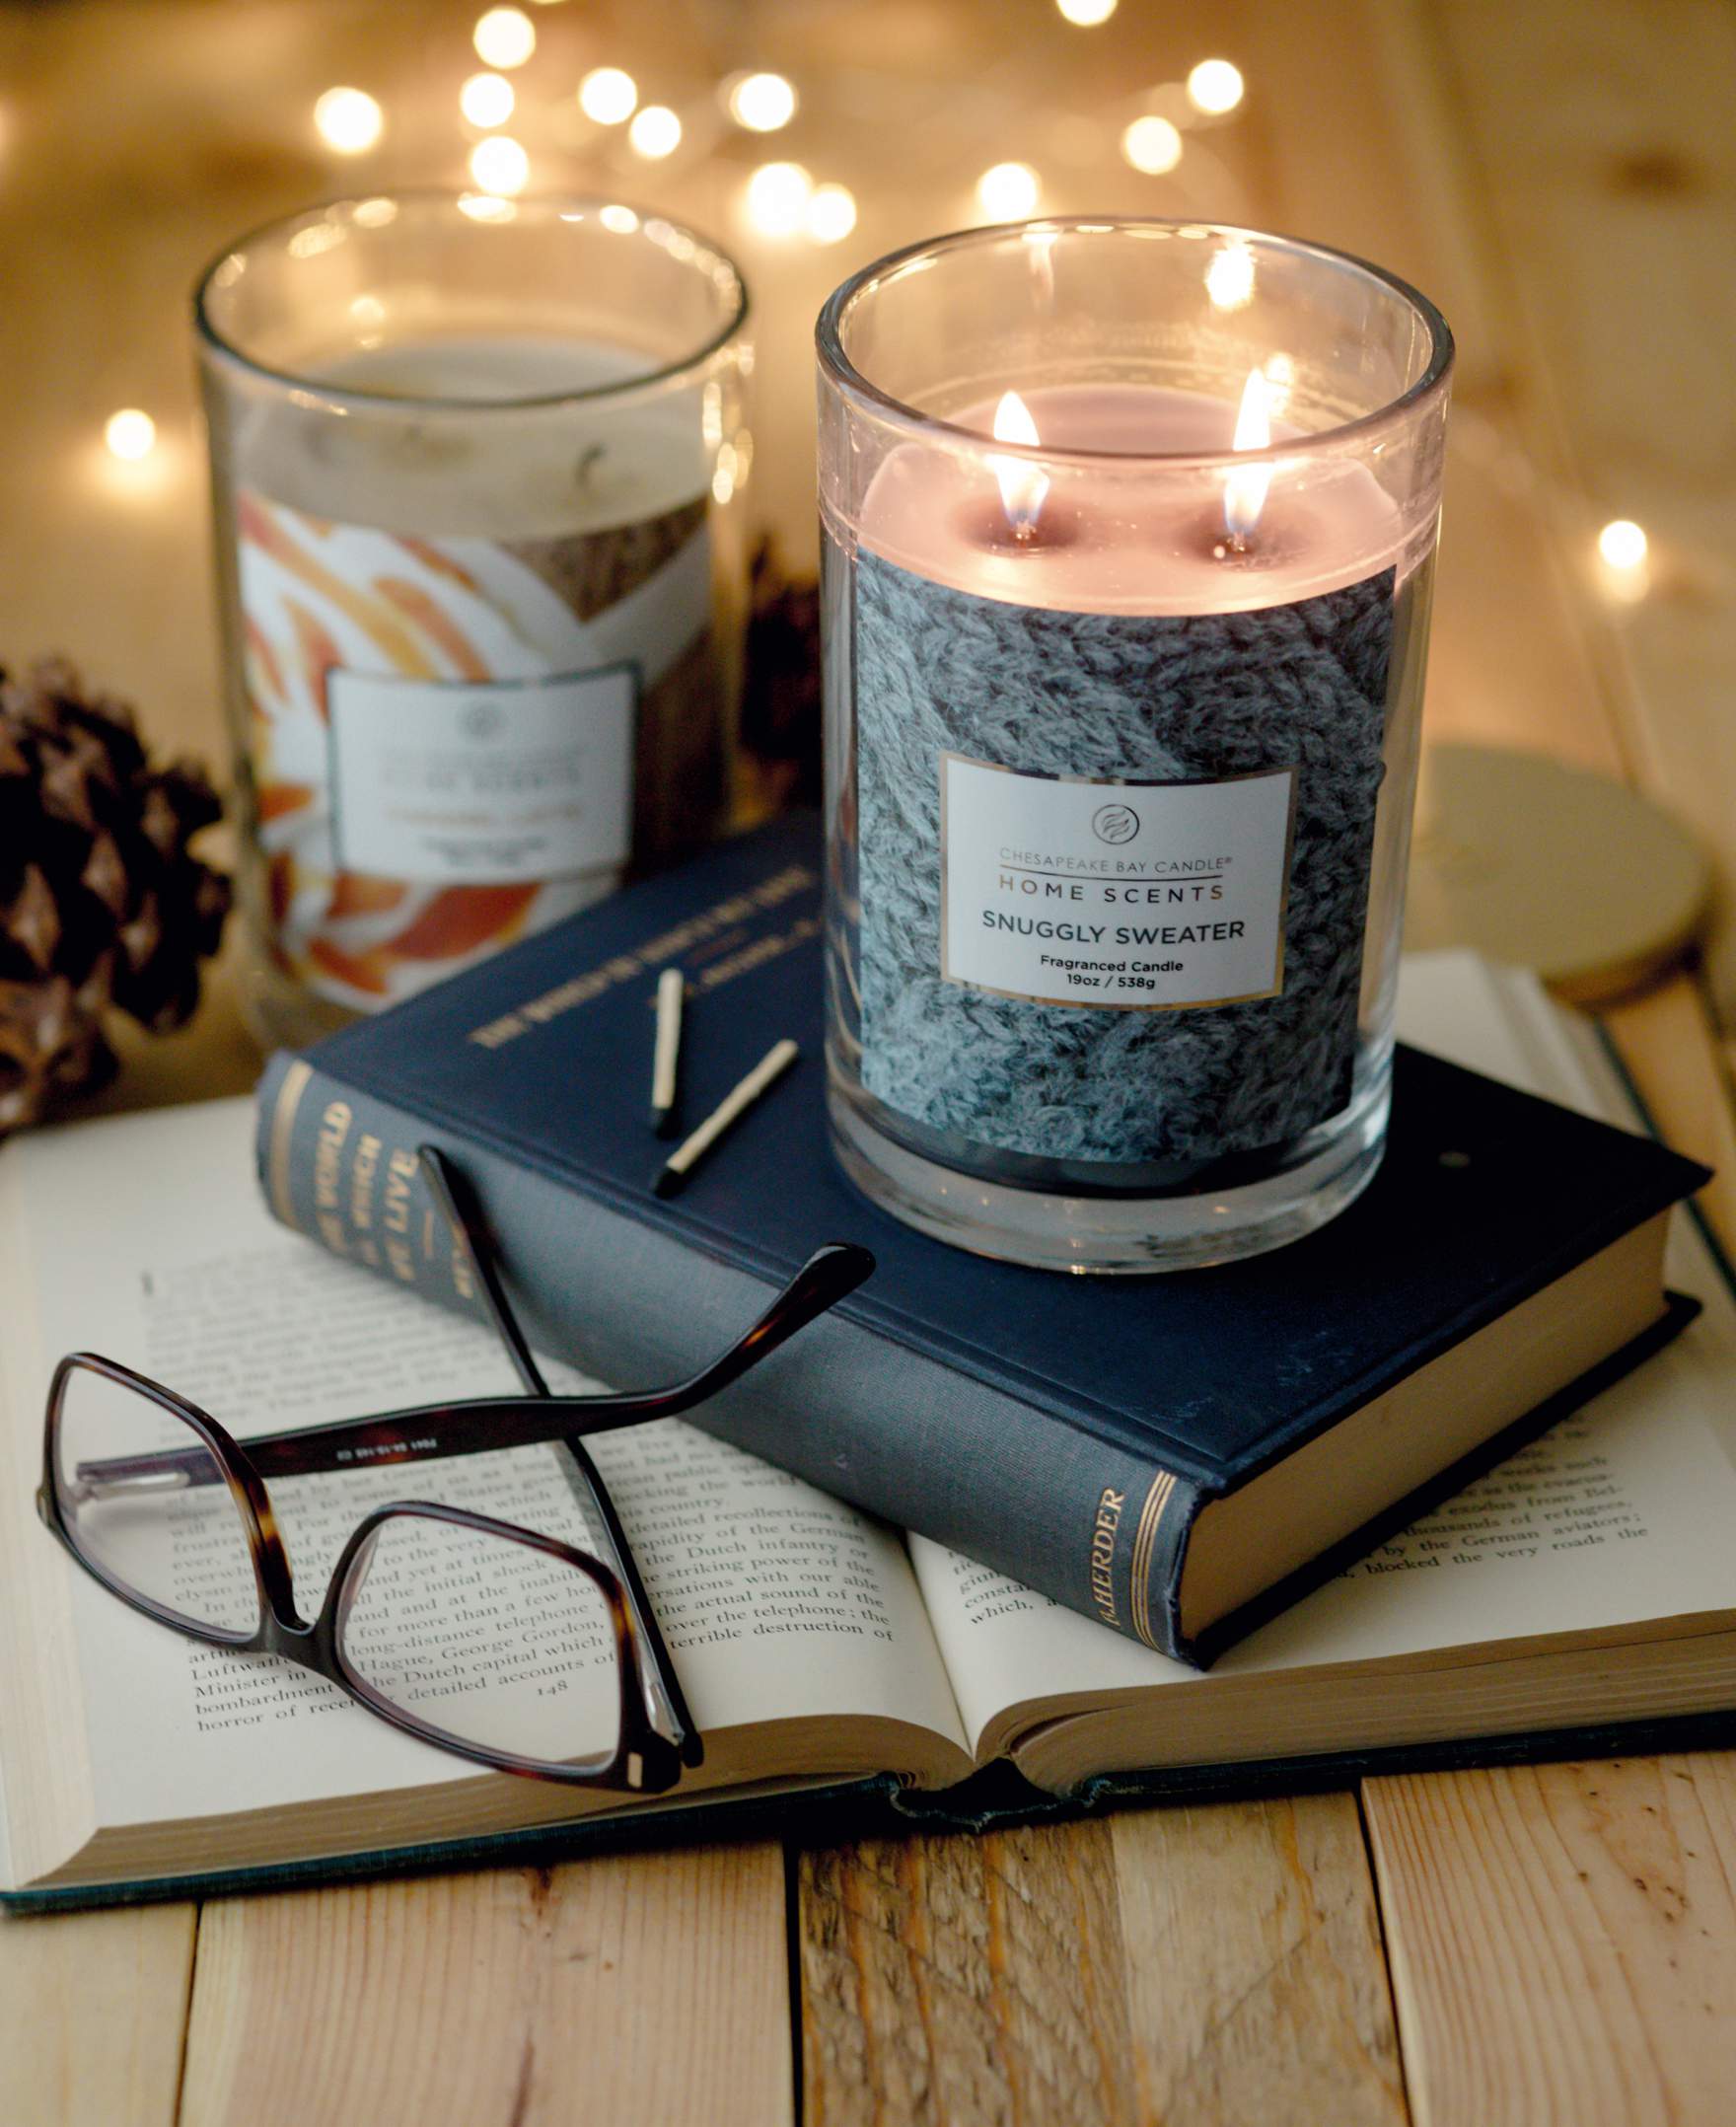 Chesapeake bay candles holiday winter scents $10 and burns for 80 hours